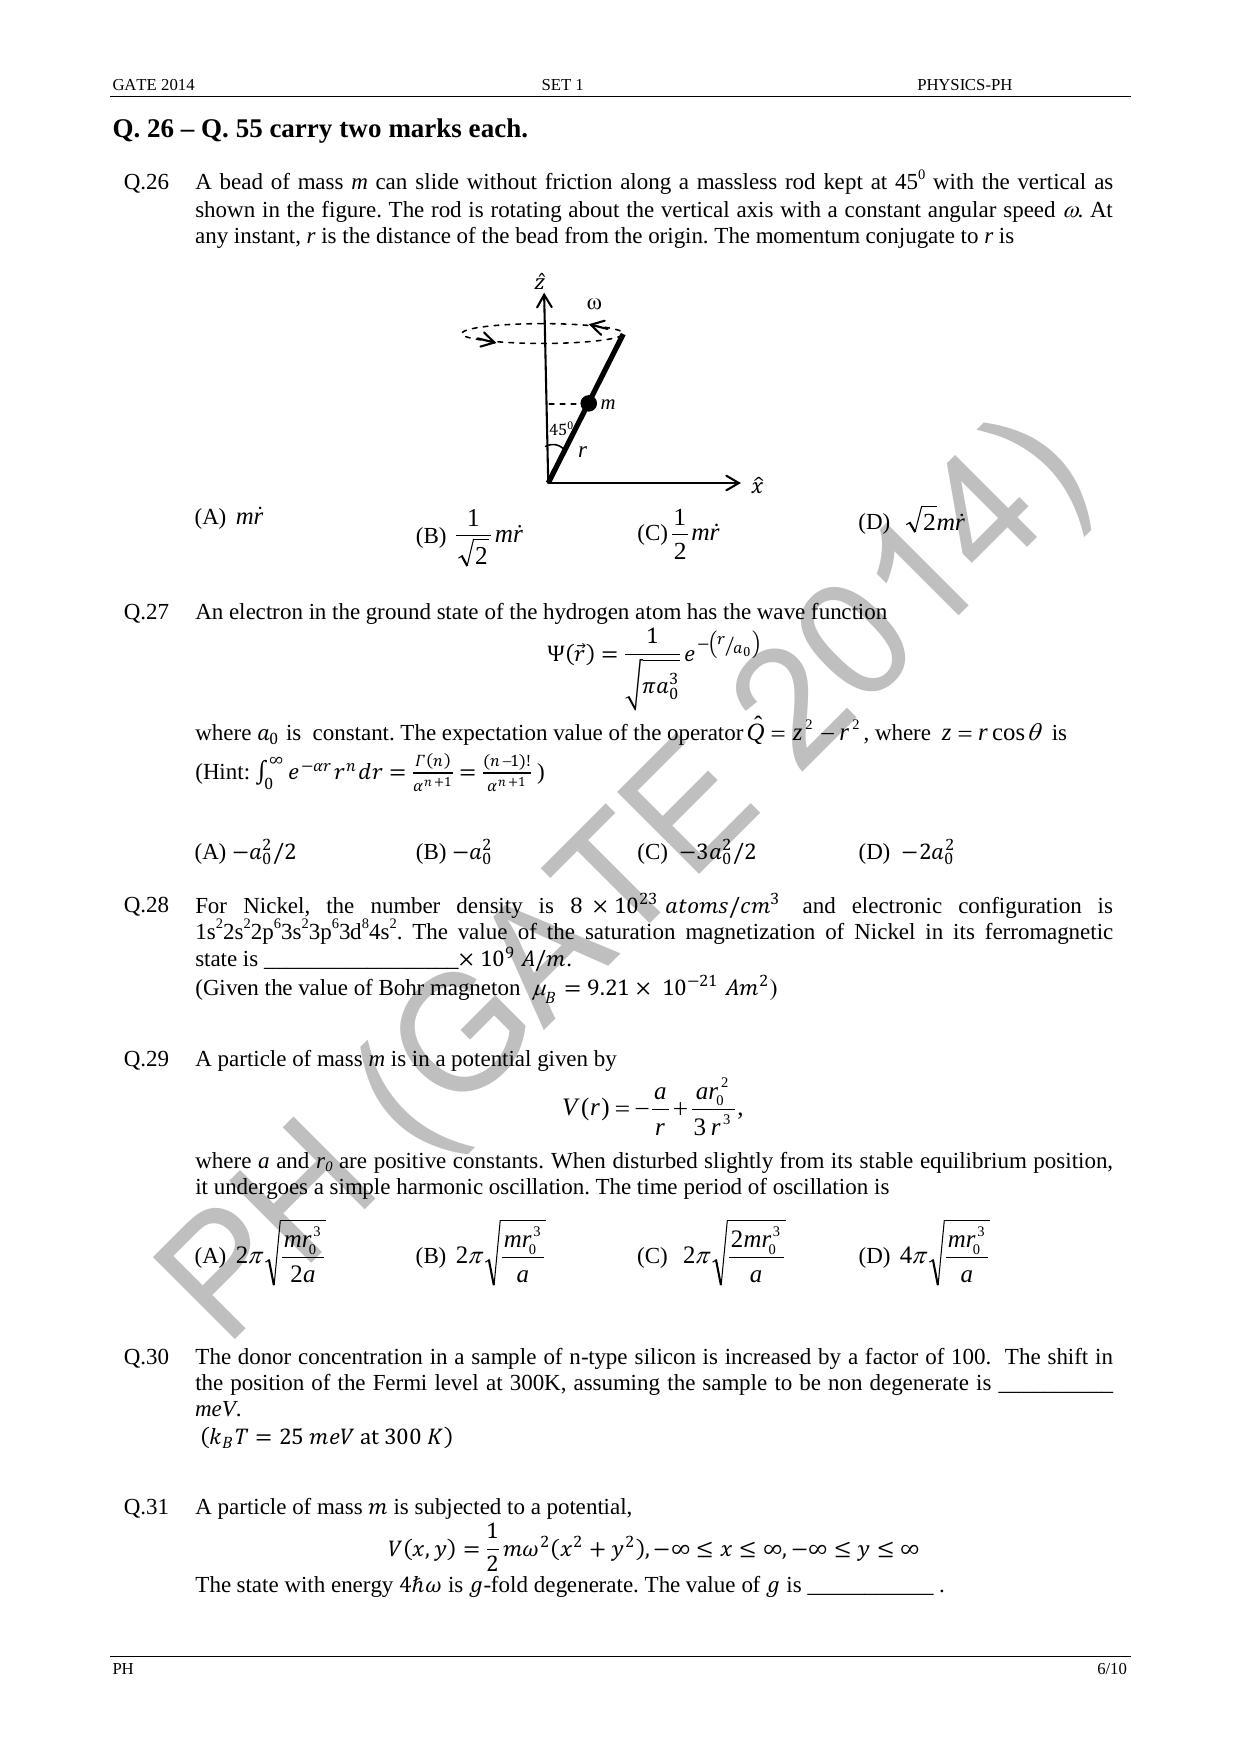 GATE 2014 Physics (PH) Question Paper with Answer Key - Page 13